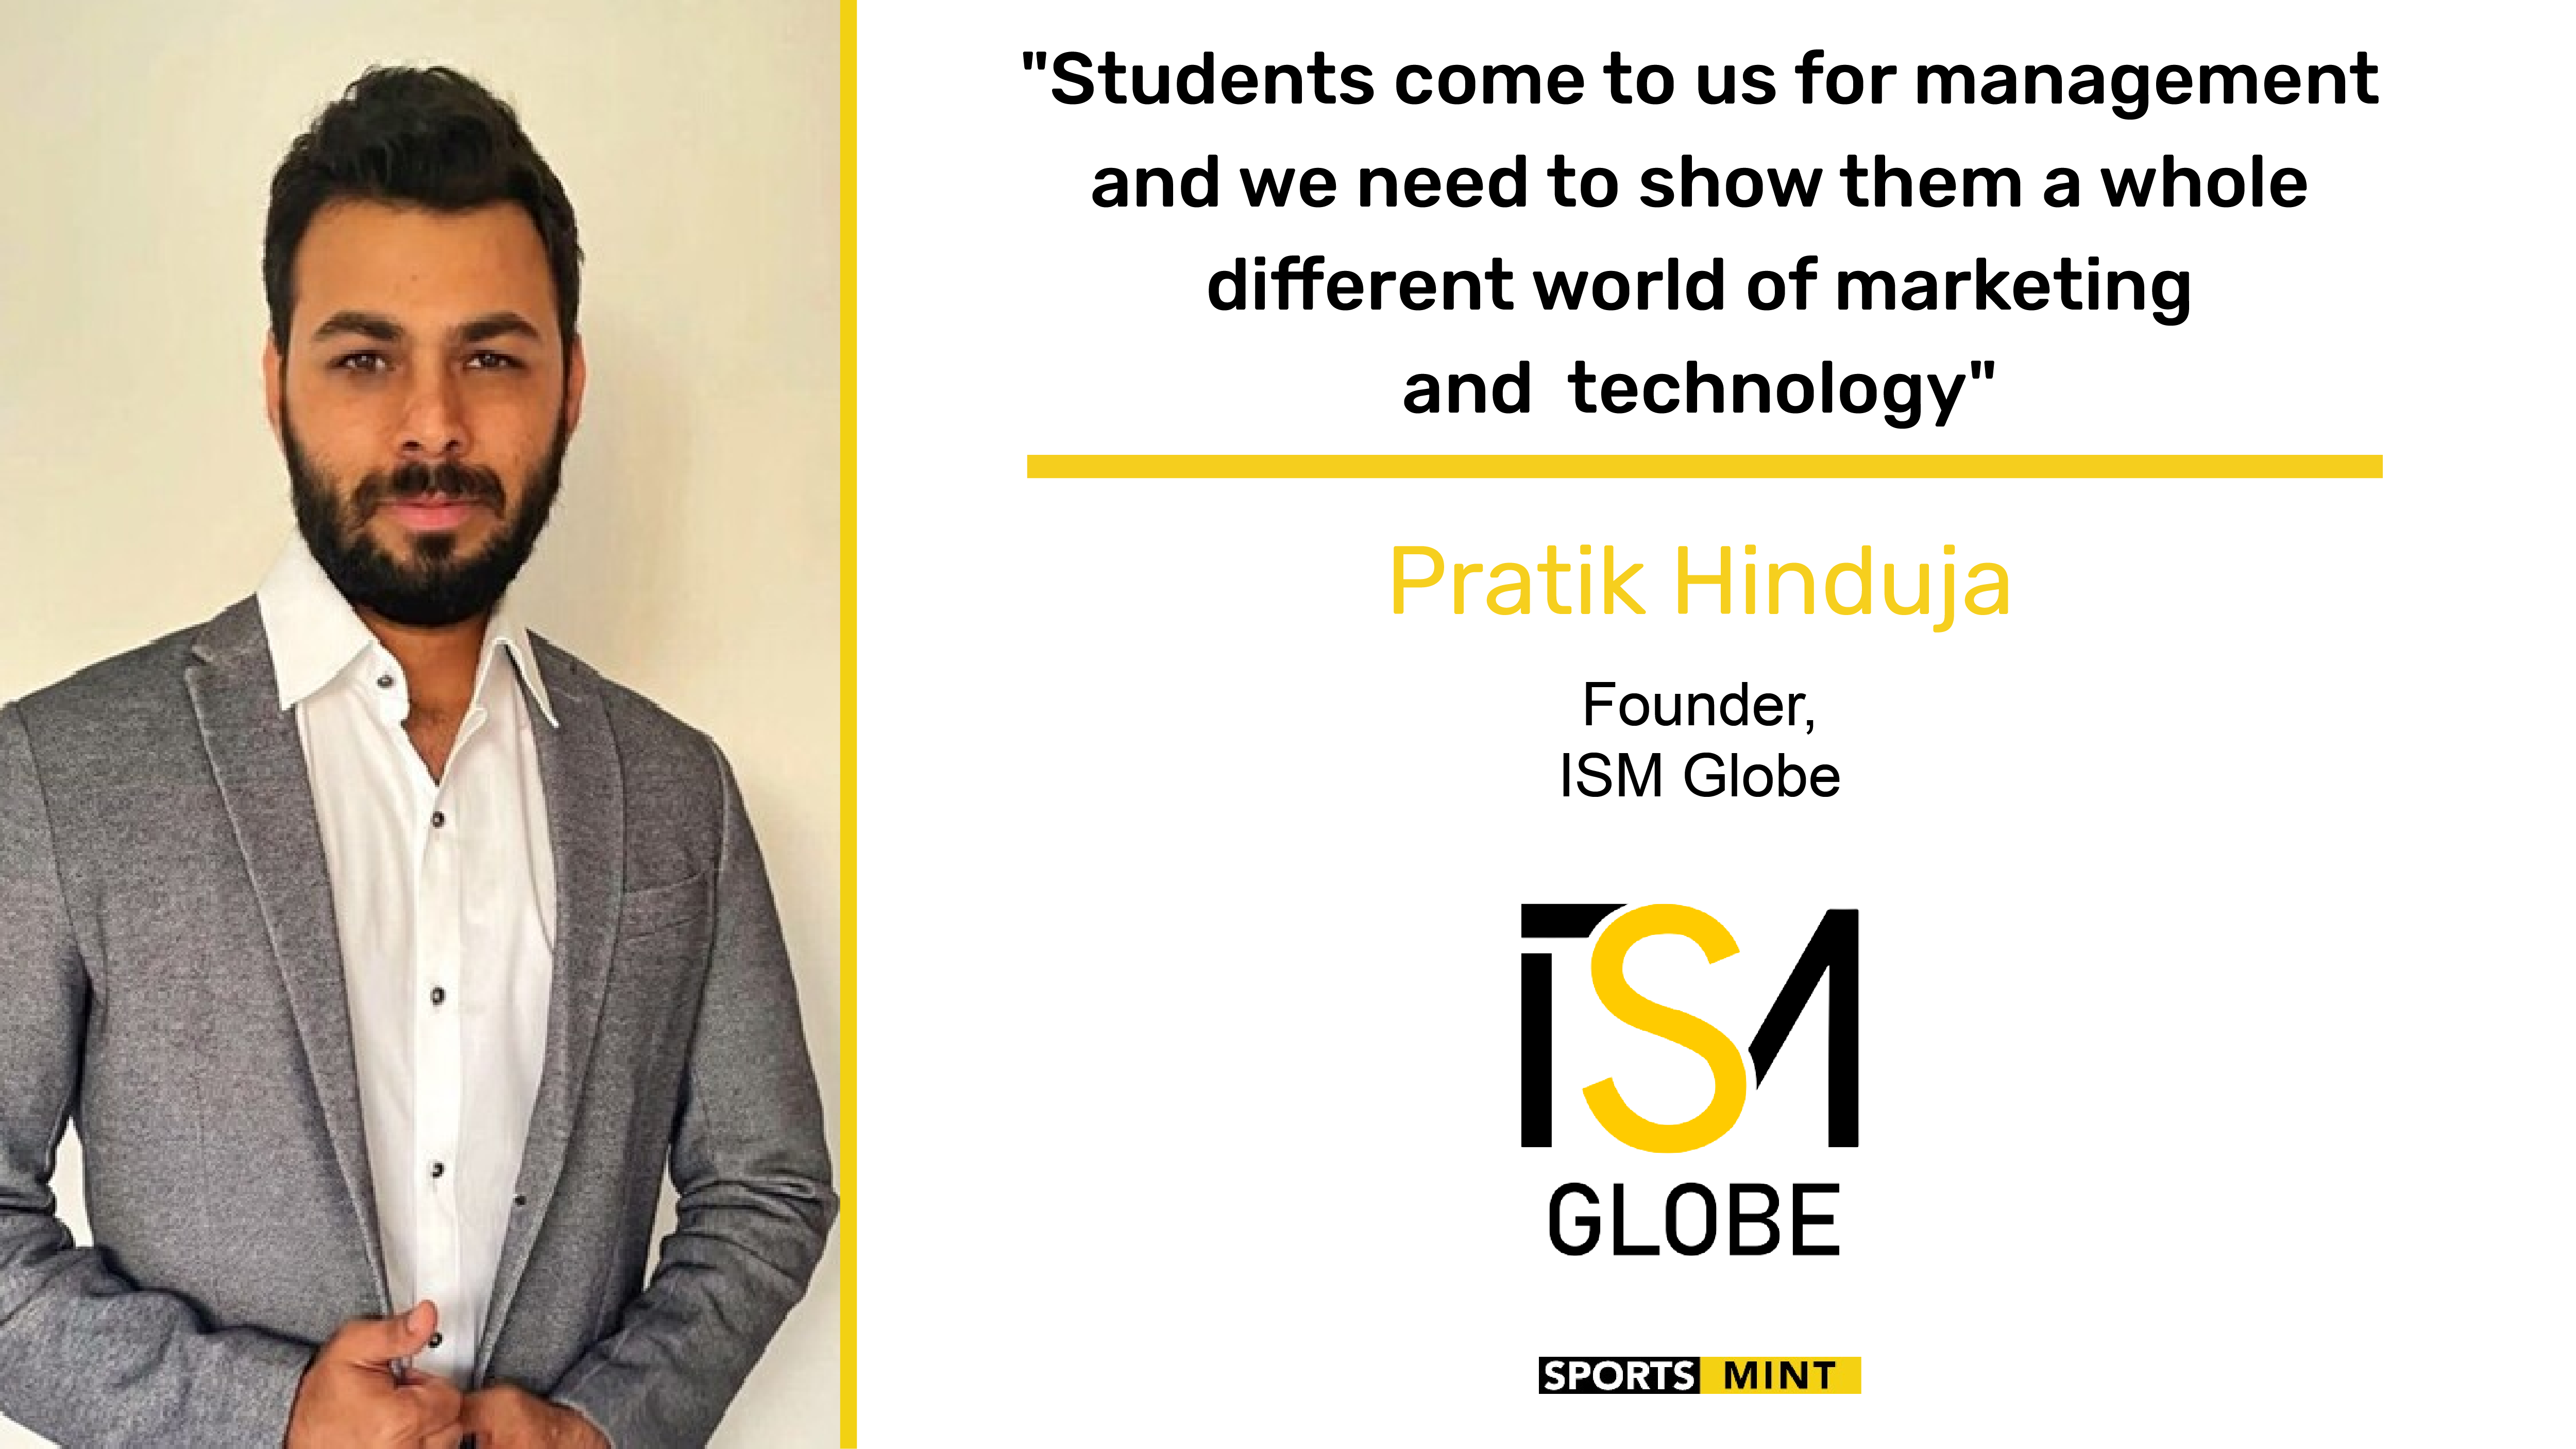 Exclusive: Students come to us for management and we need to show them a whole different world of marketing & technology - Pratik Hinduja, Founder of ISM GLOBE